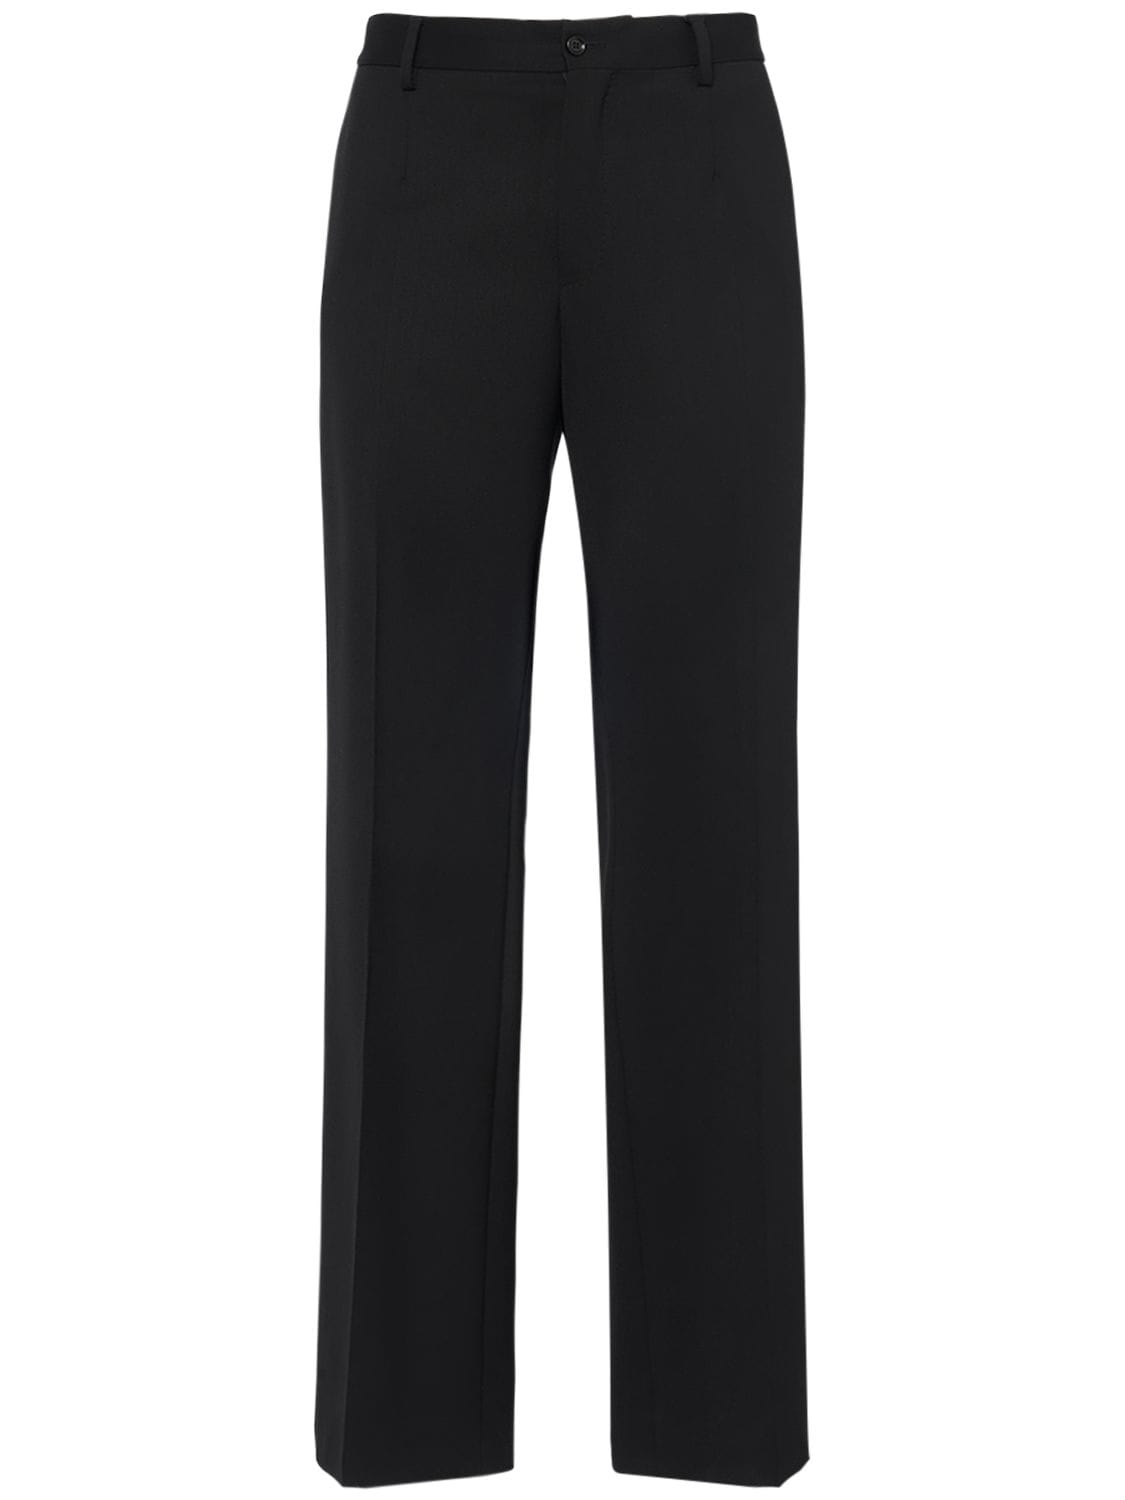 Image of Stretch Wool Pants